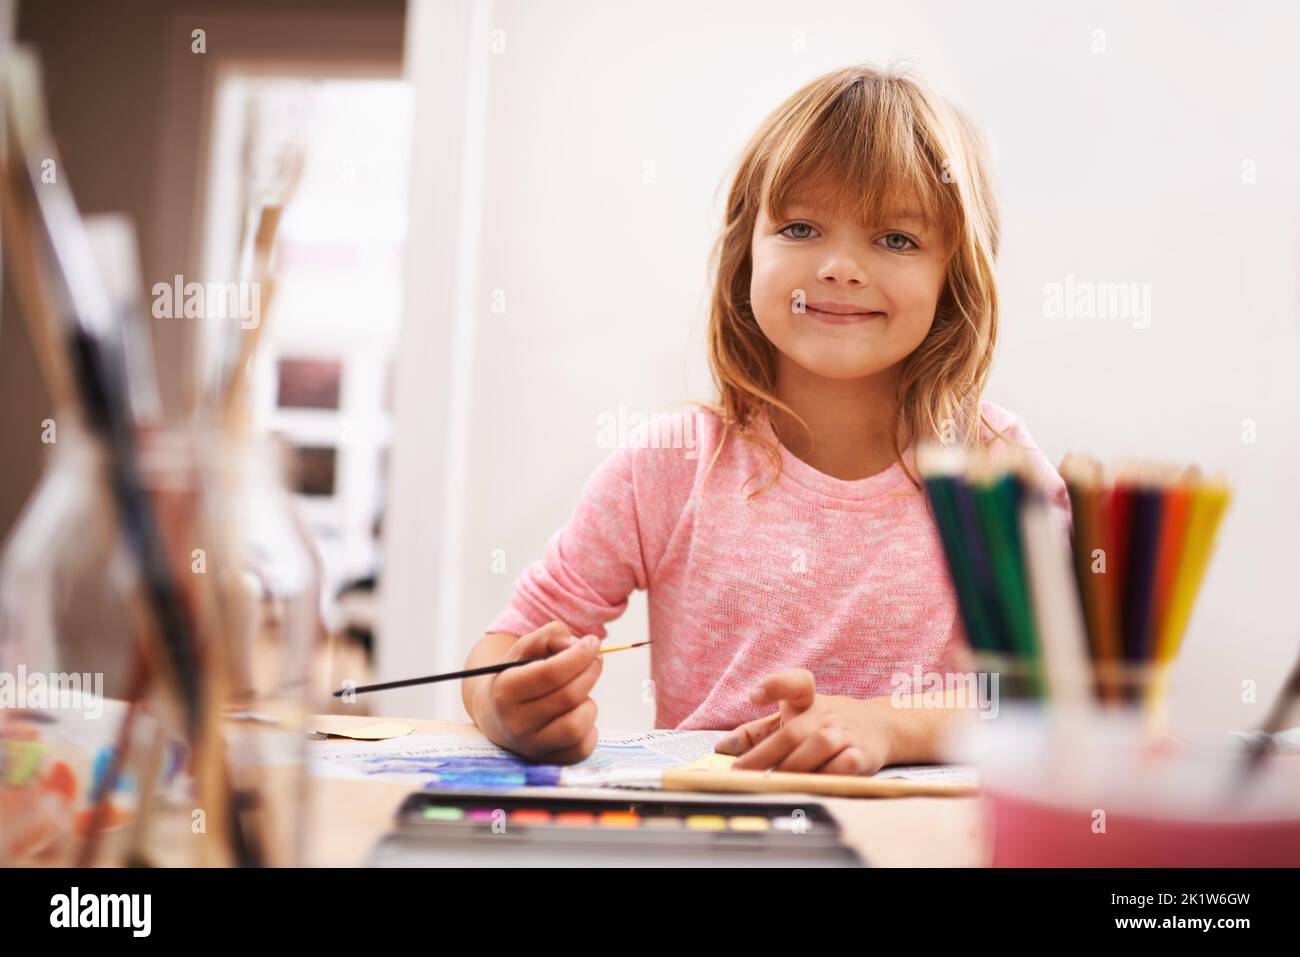 Shes so creative. Portrait of a little girl painting at school. Stock Photo